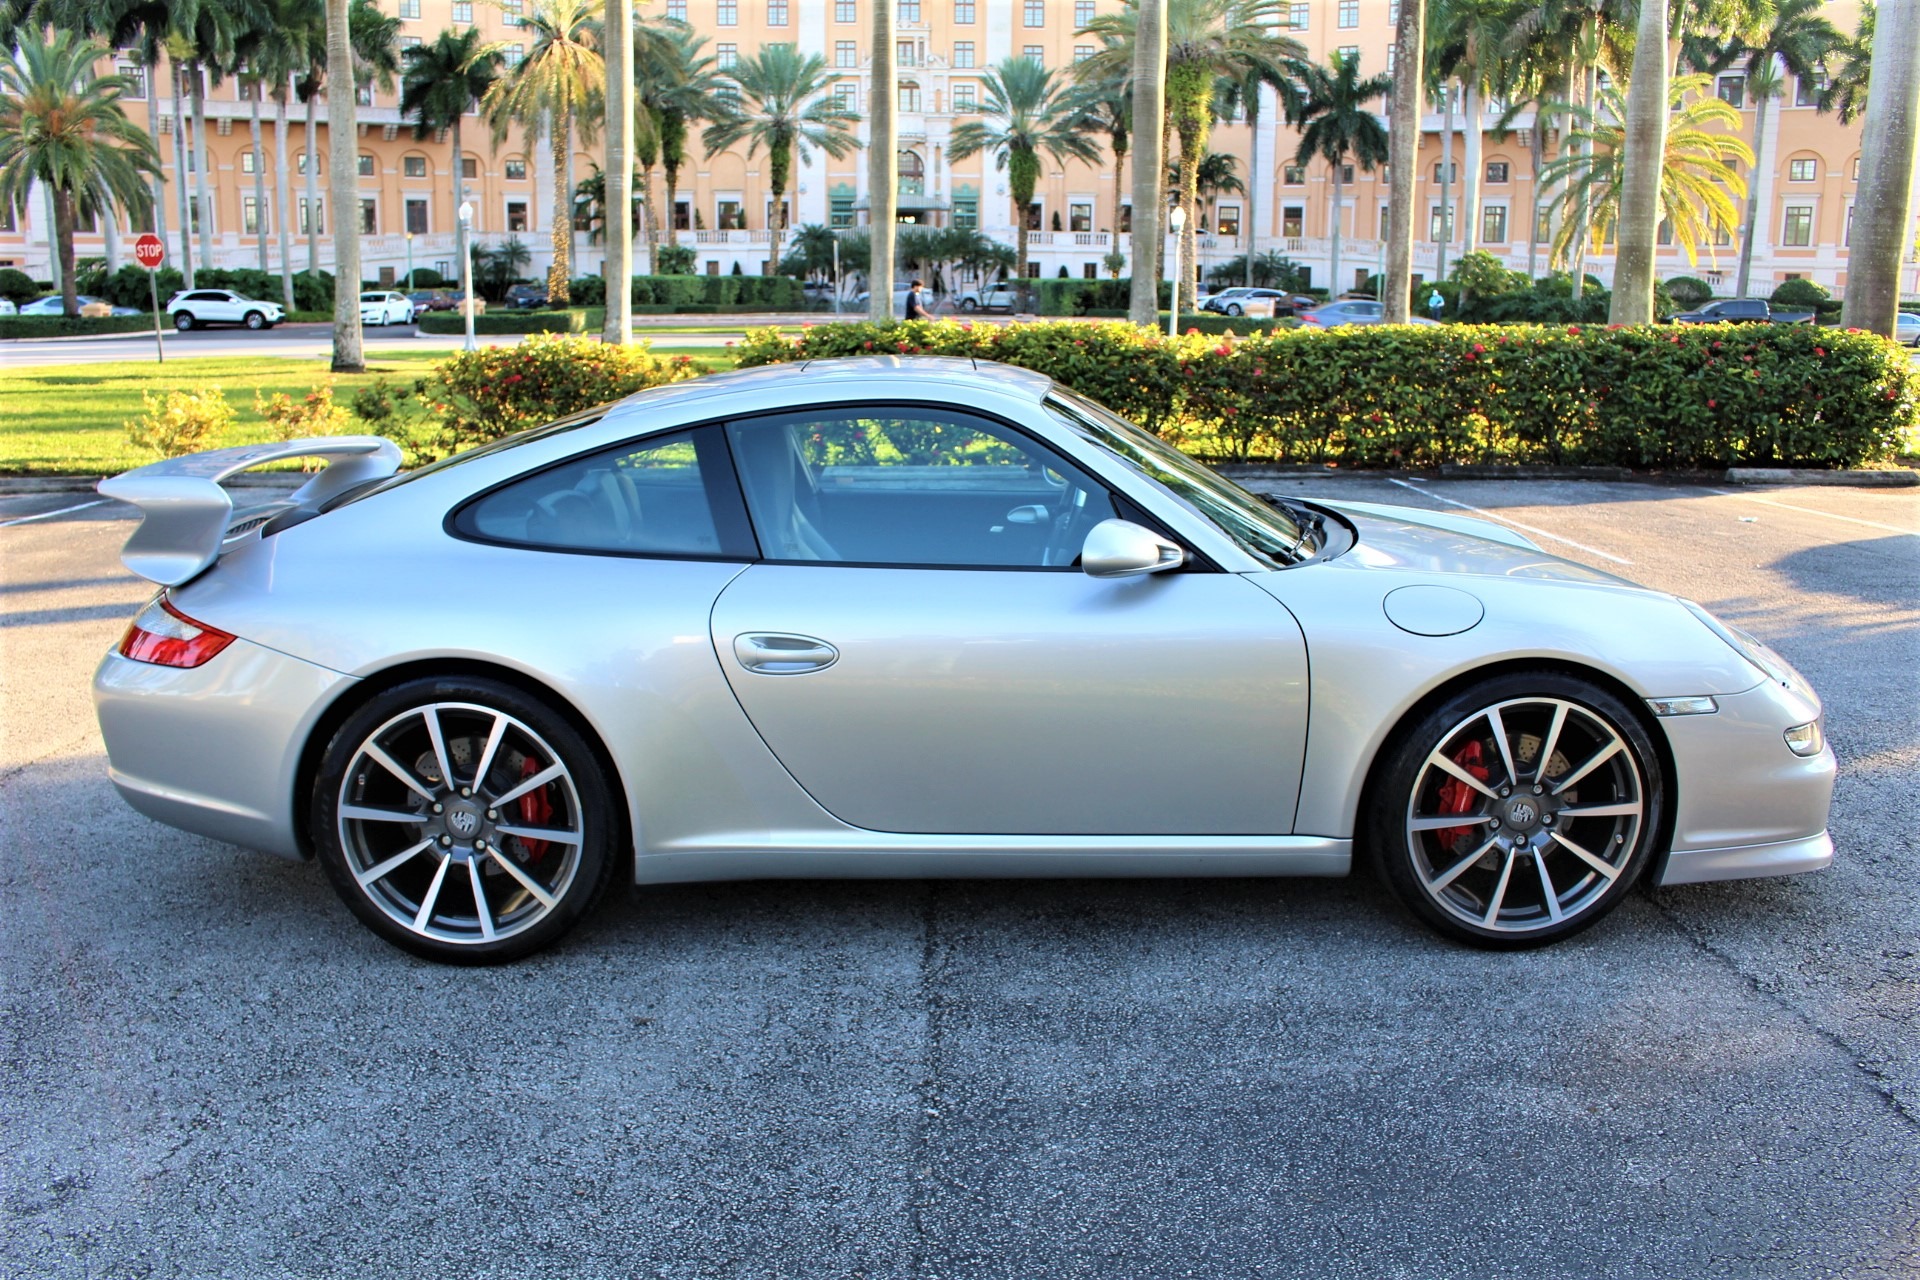 Used 2006 Porsche 911 Carrera S for sale Sold at The Gables Sports Cars in Miami FL 33146 2